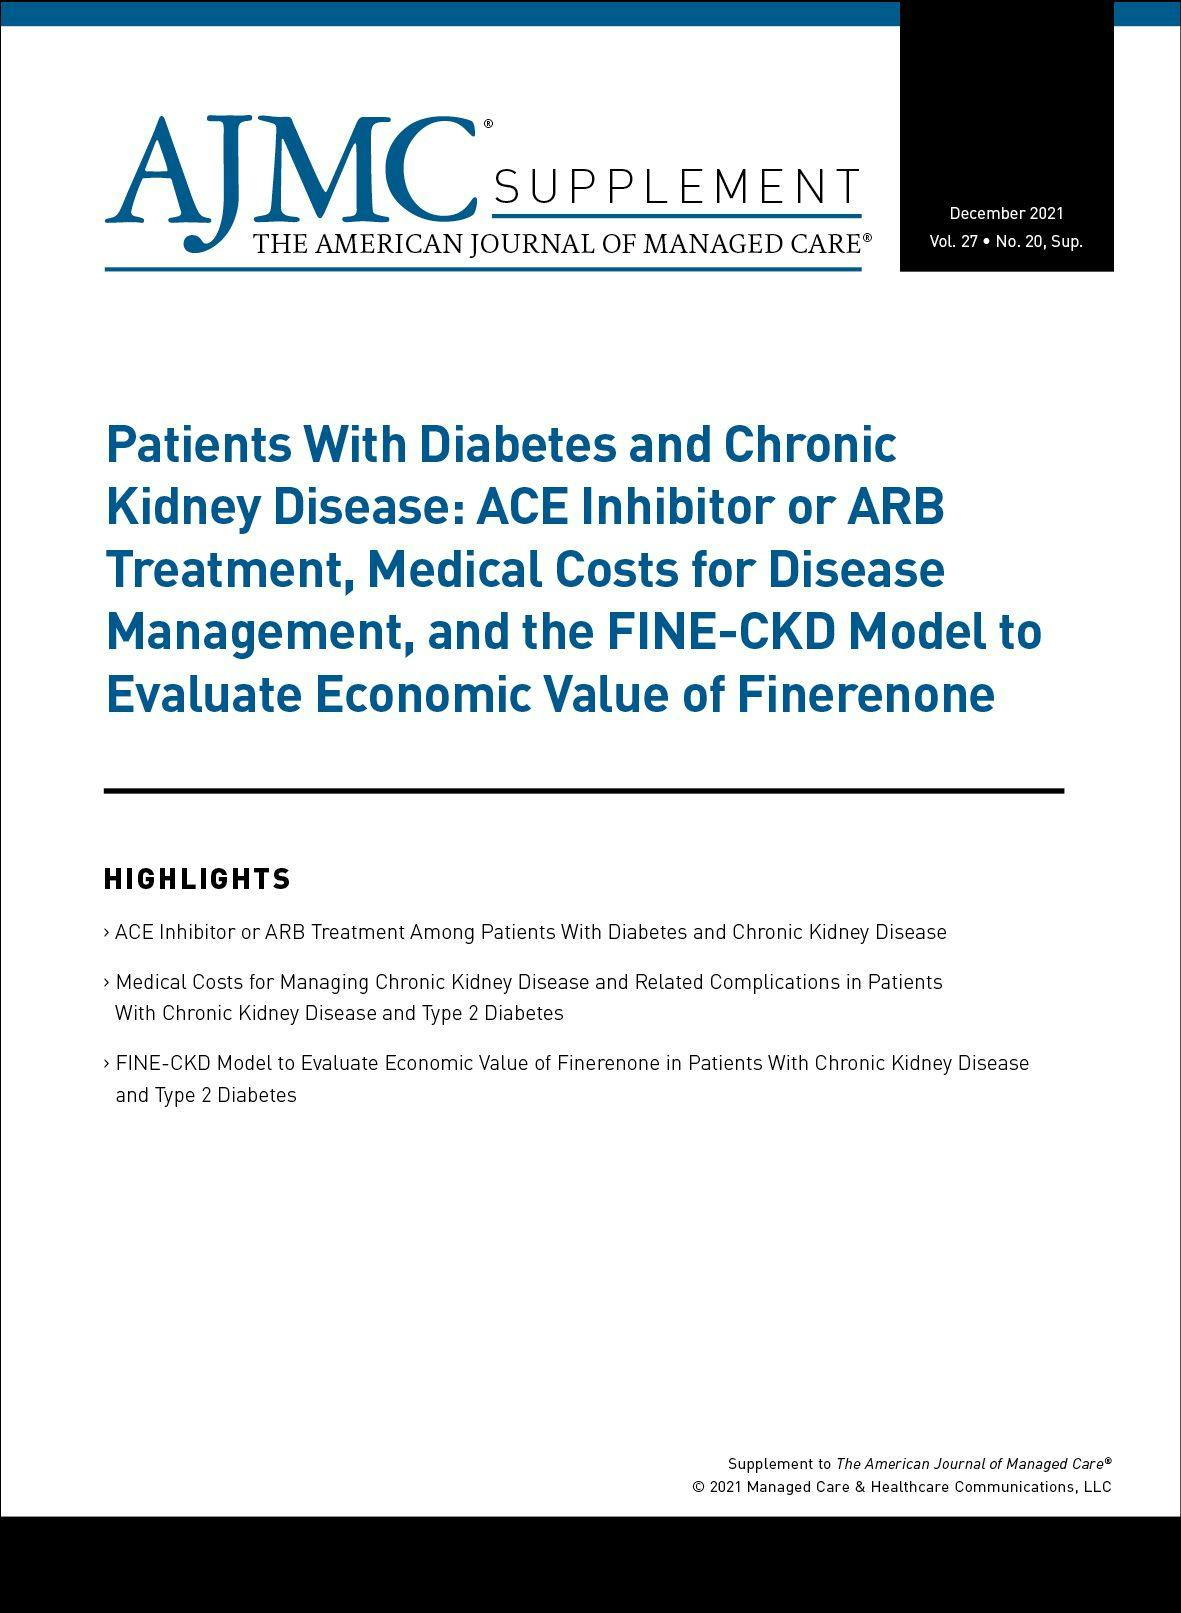 Patients With Diabetes and Chronic Kidney Disease: ACE Inhibitor or ARB Treatment, Medical Costs for Disease Management, and the FINE-CKD Model to Evaluate Economic Value of Finerenone